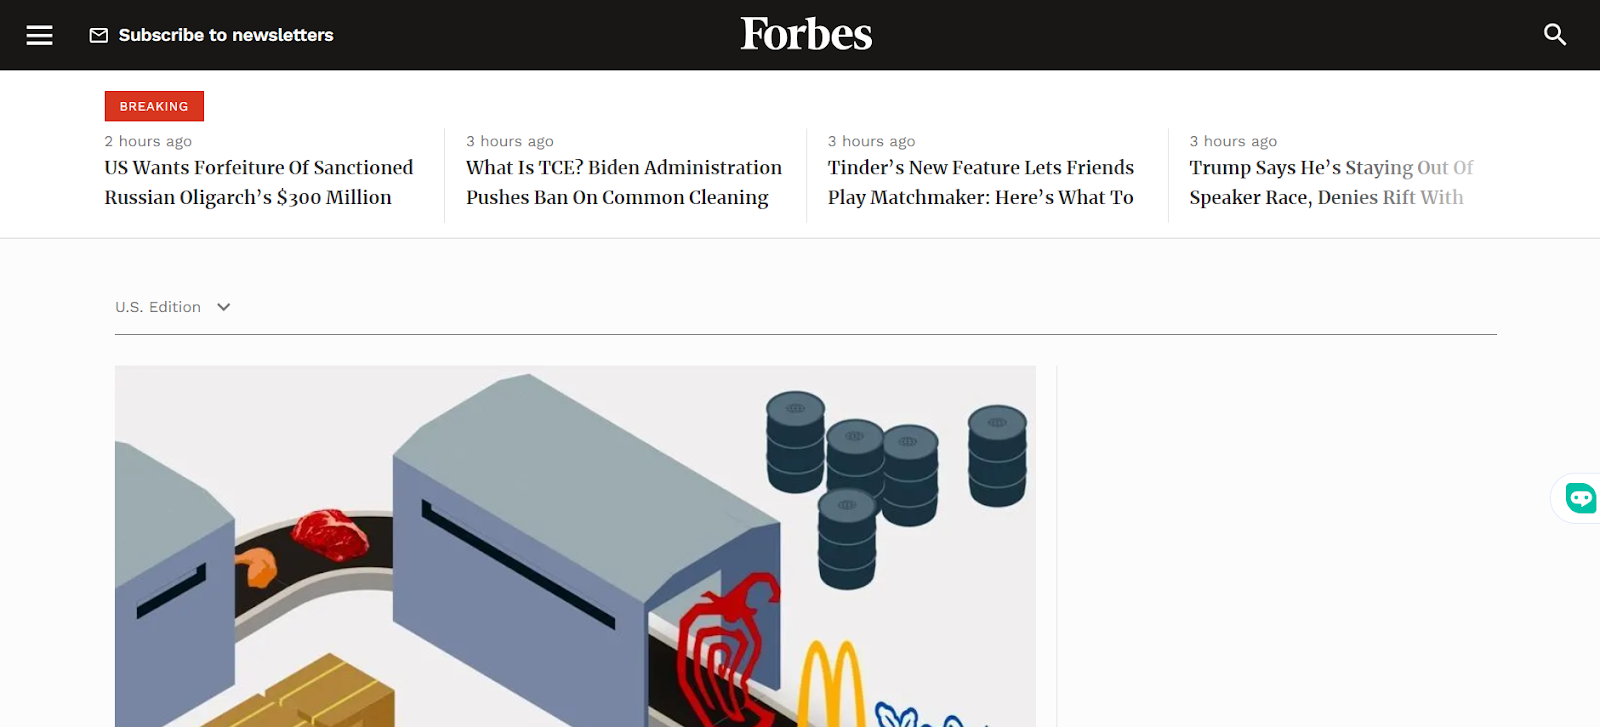 "Forbes"